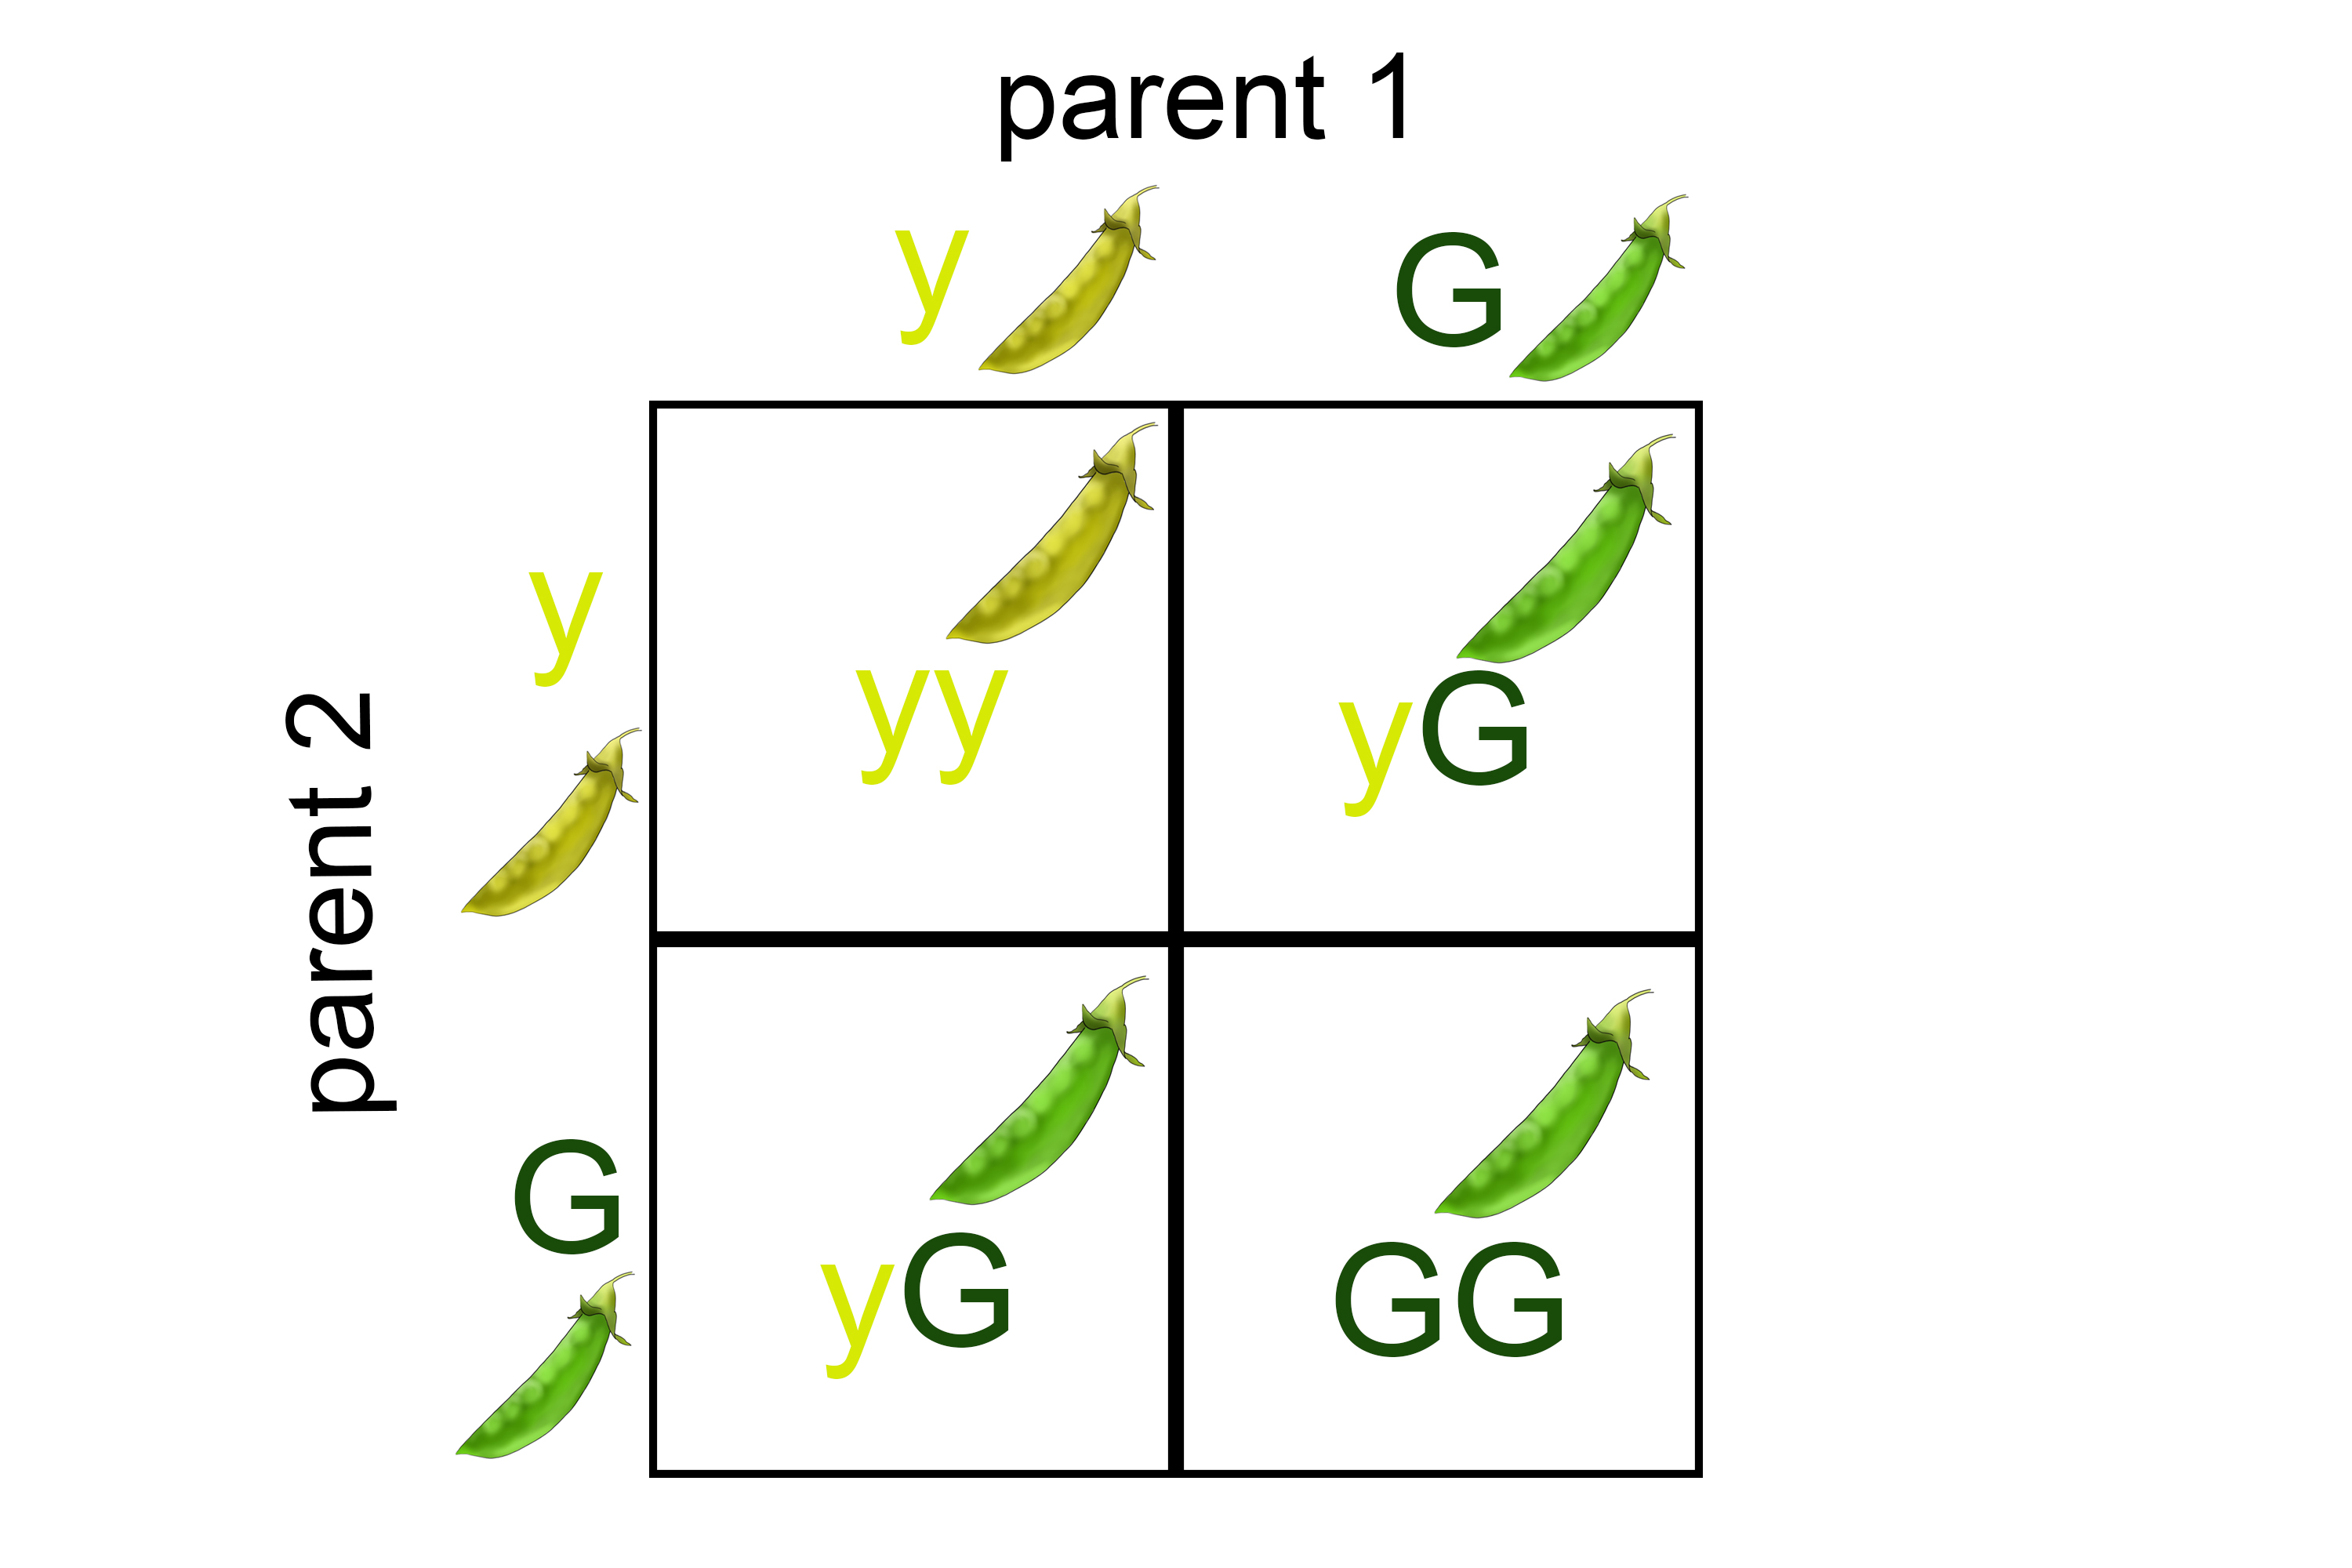 Punnett square showing there is a 75% chance of green pods being inherited where 25% will be yellow